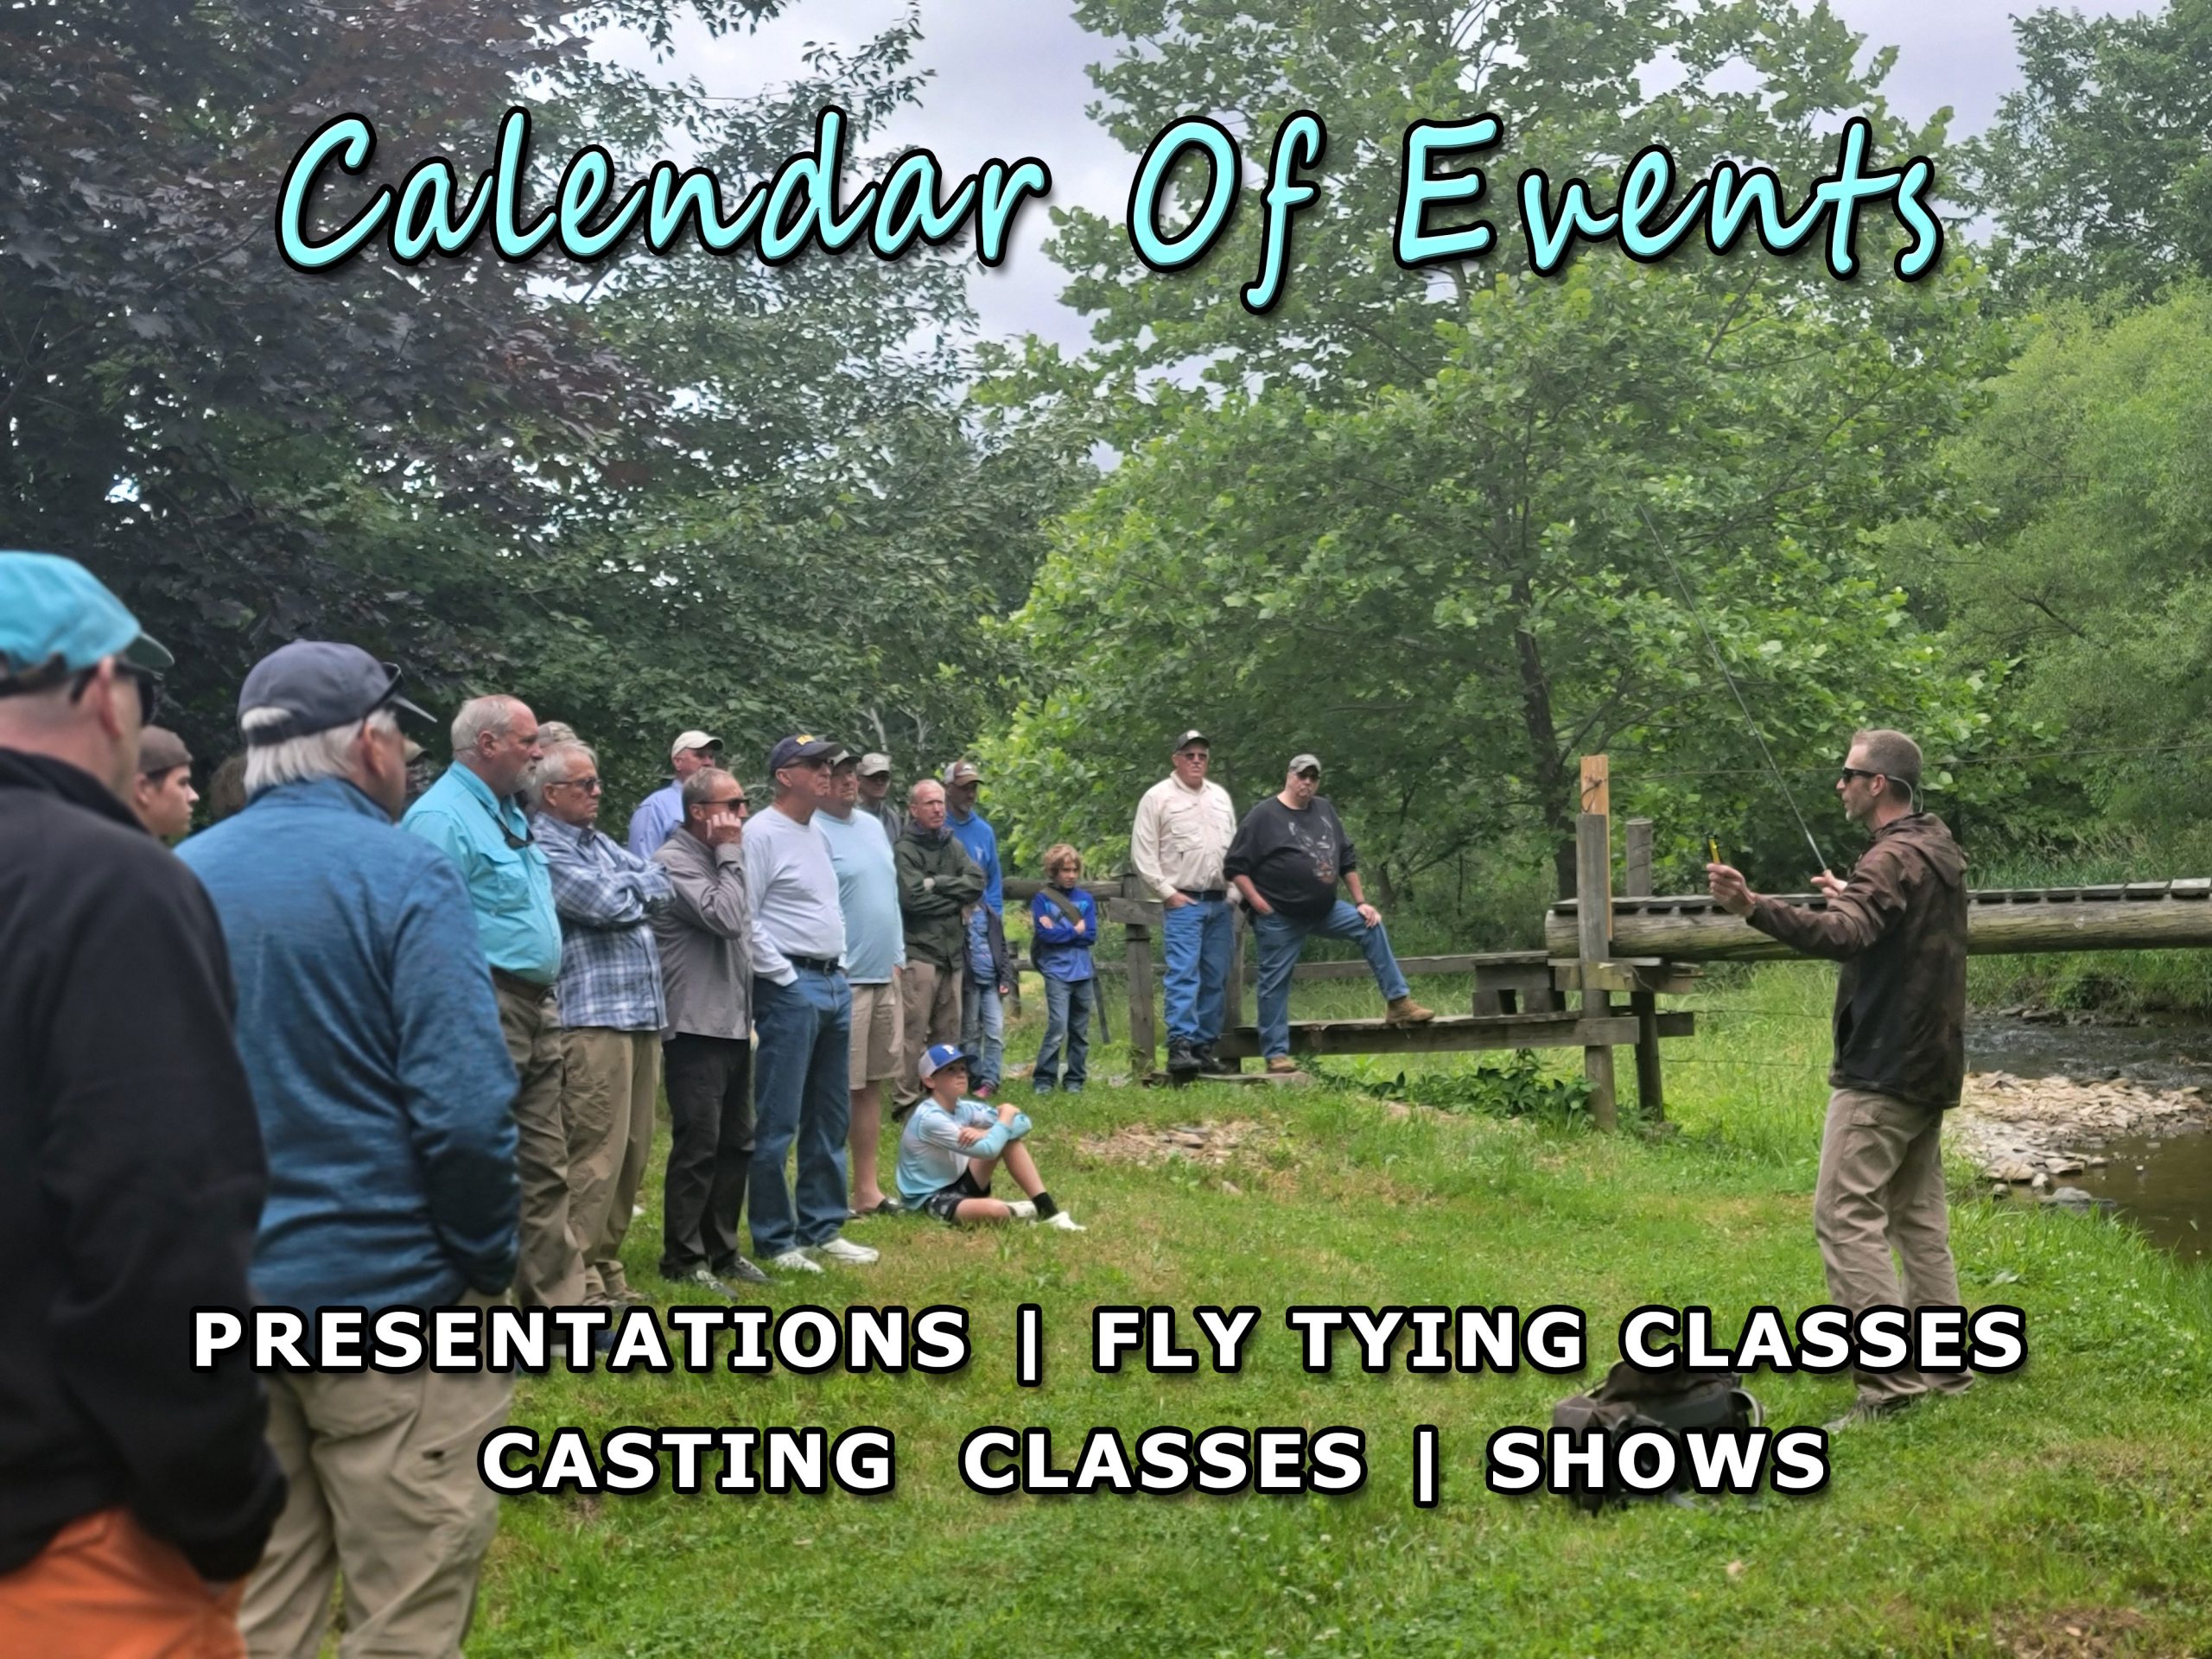 Throughout The Year We Hold Seminars, Fly Tying And Casting Classes. Learn From Our Experience.